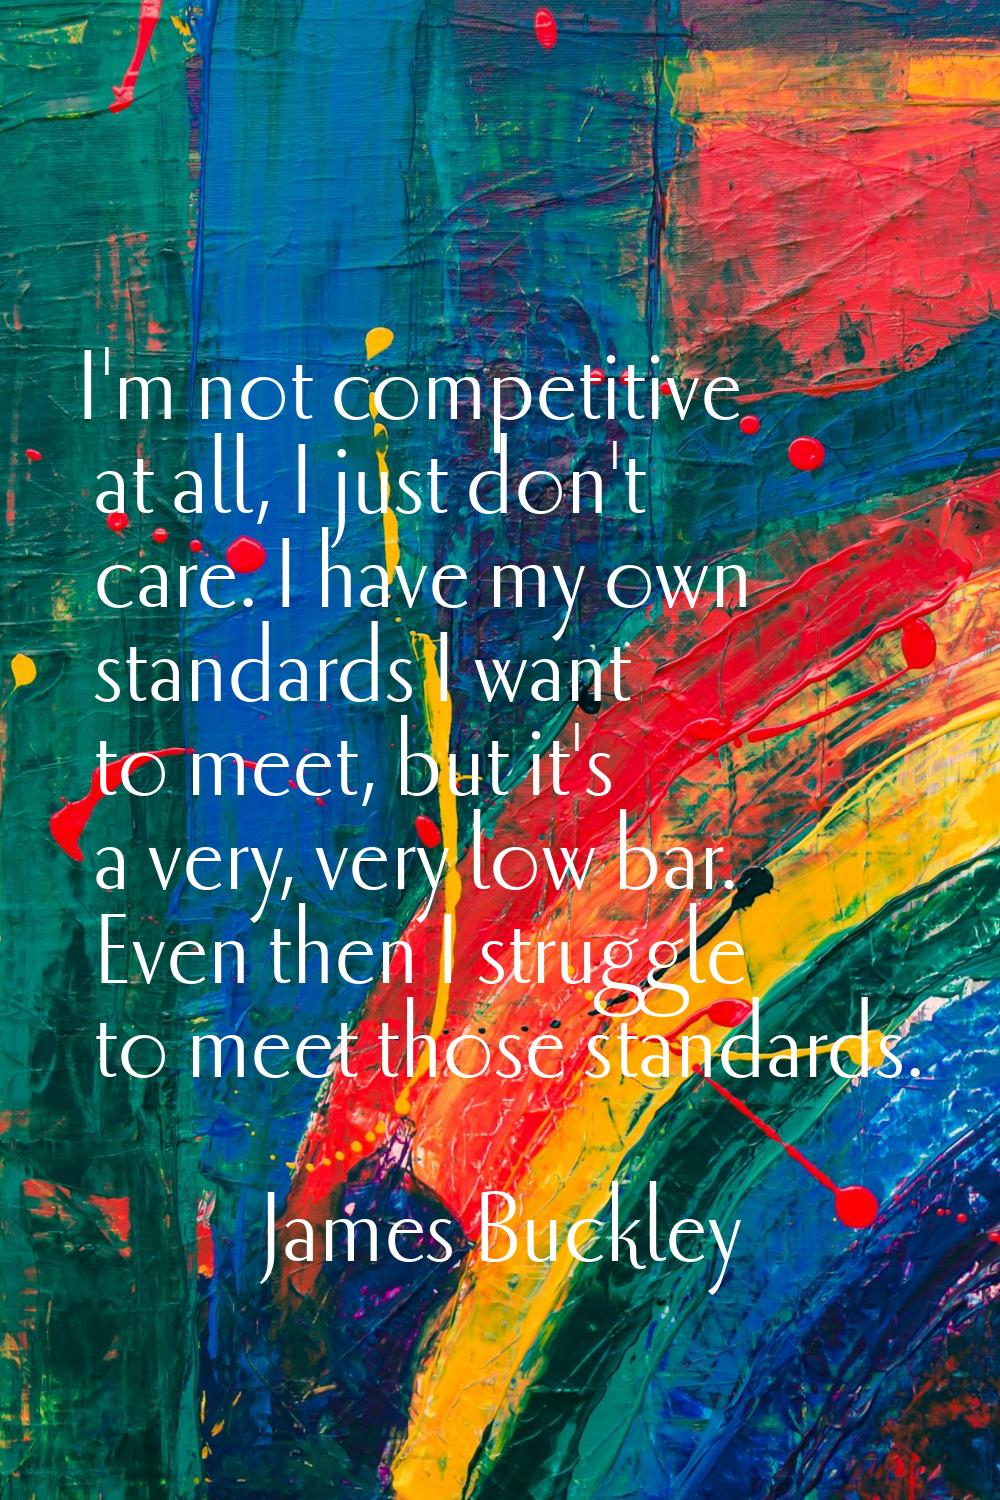 I'm not competitive at all, I just don't care. I have my own standards I want to meet, but it's a v